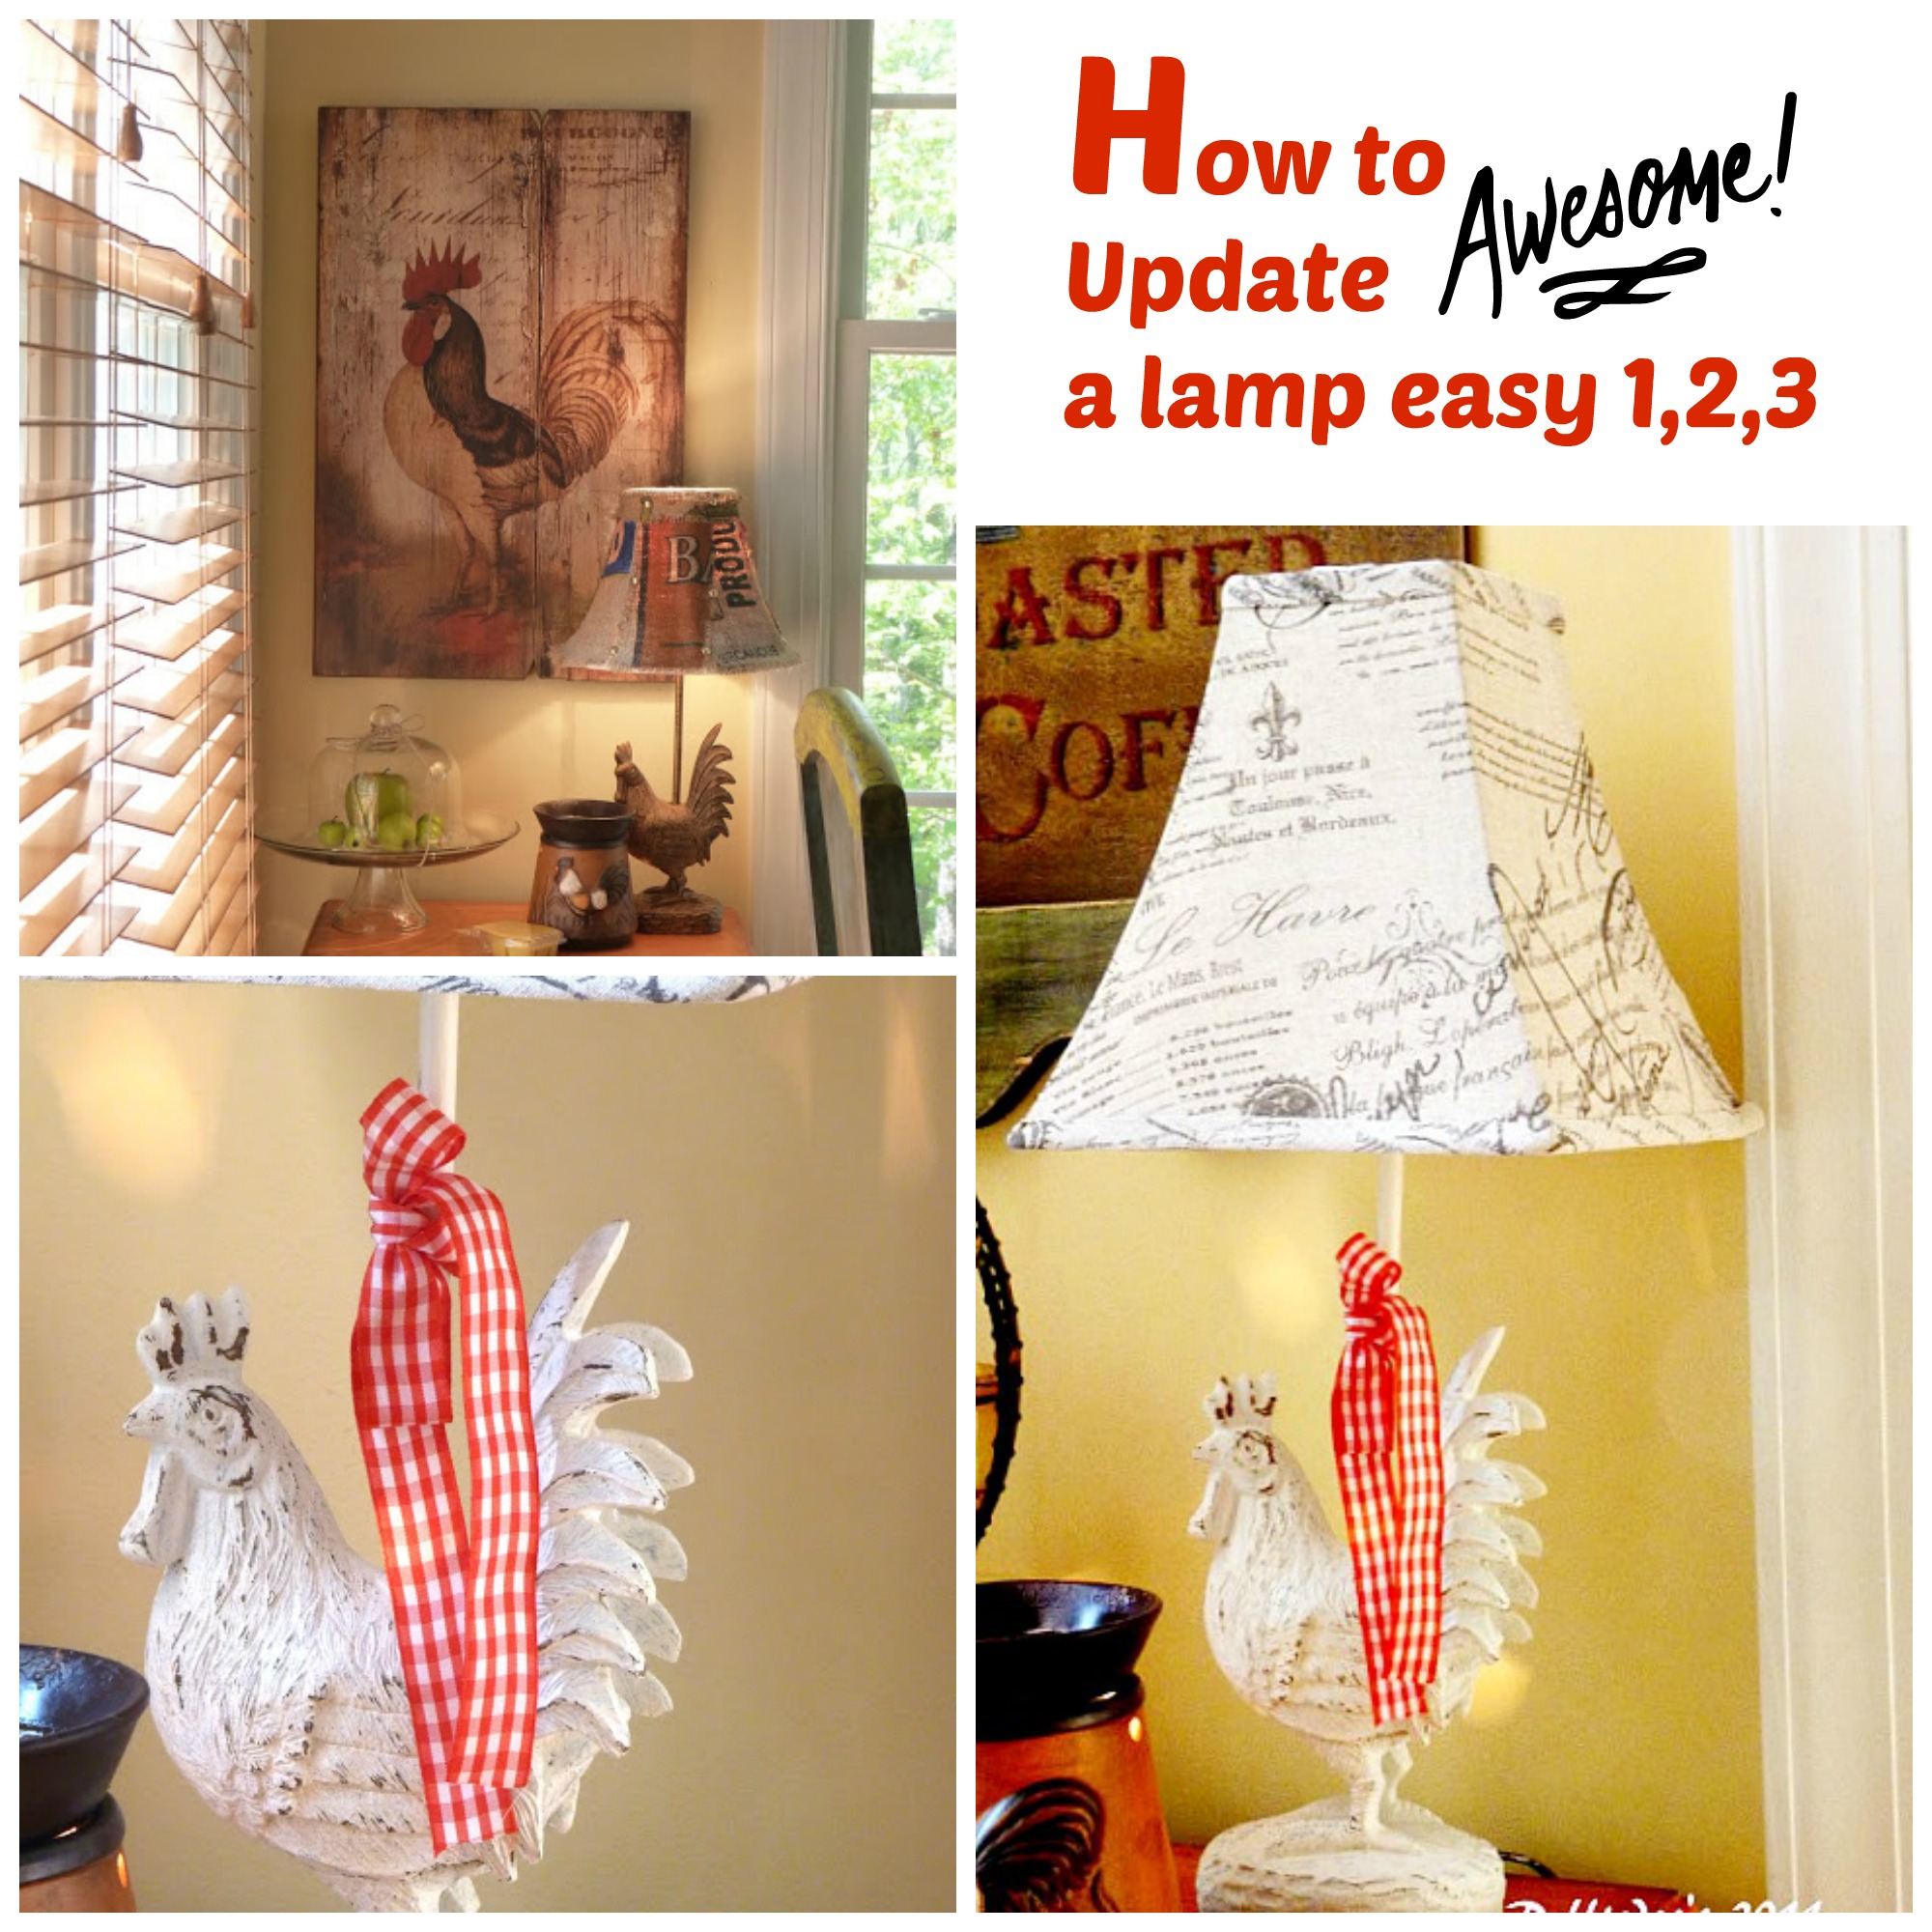 How to update a lamp